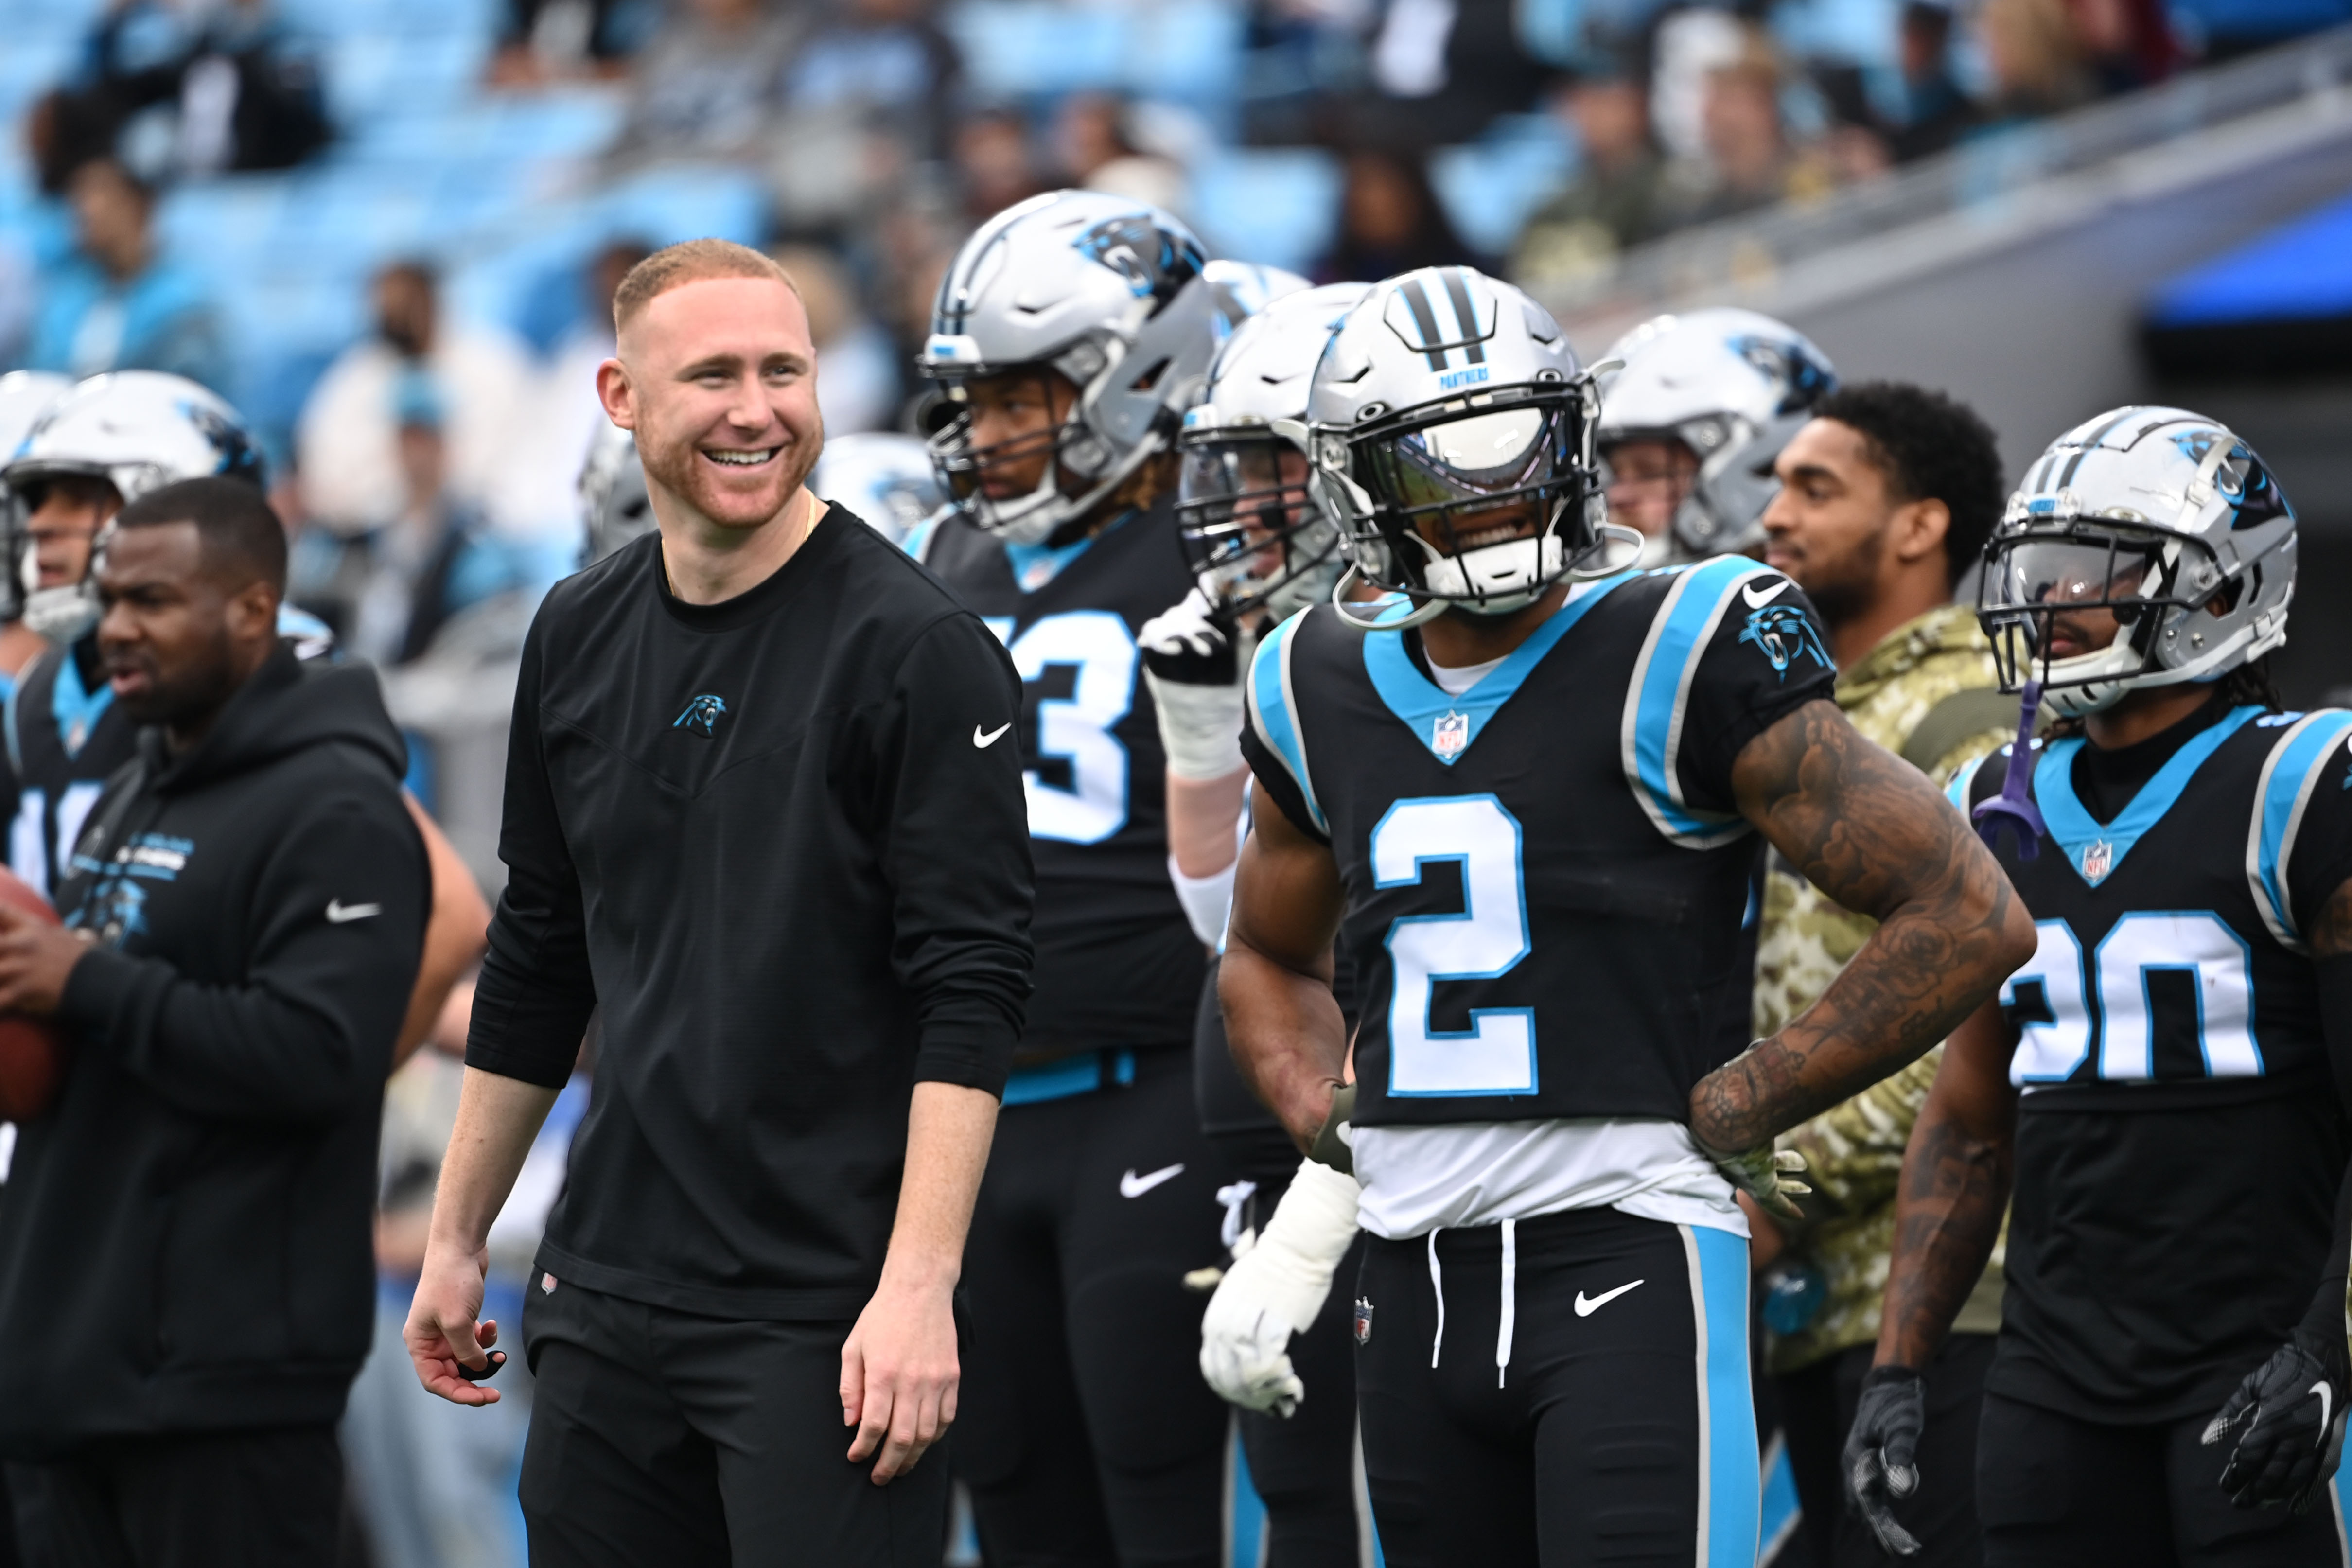 Nov 21, 2021; Charlotte, North Carolina, USA;  Carolina Panthers assistant coach Joe Brady and wide receiver D.J. Moore (2) on the field before the game at Bank of America Stadium. Mandatory Credit: Bob Donnan-USA TODAY Sports